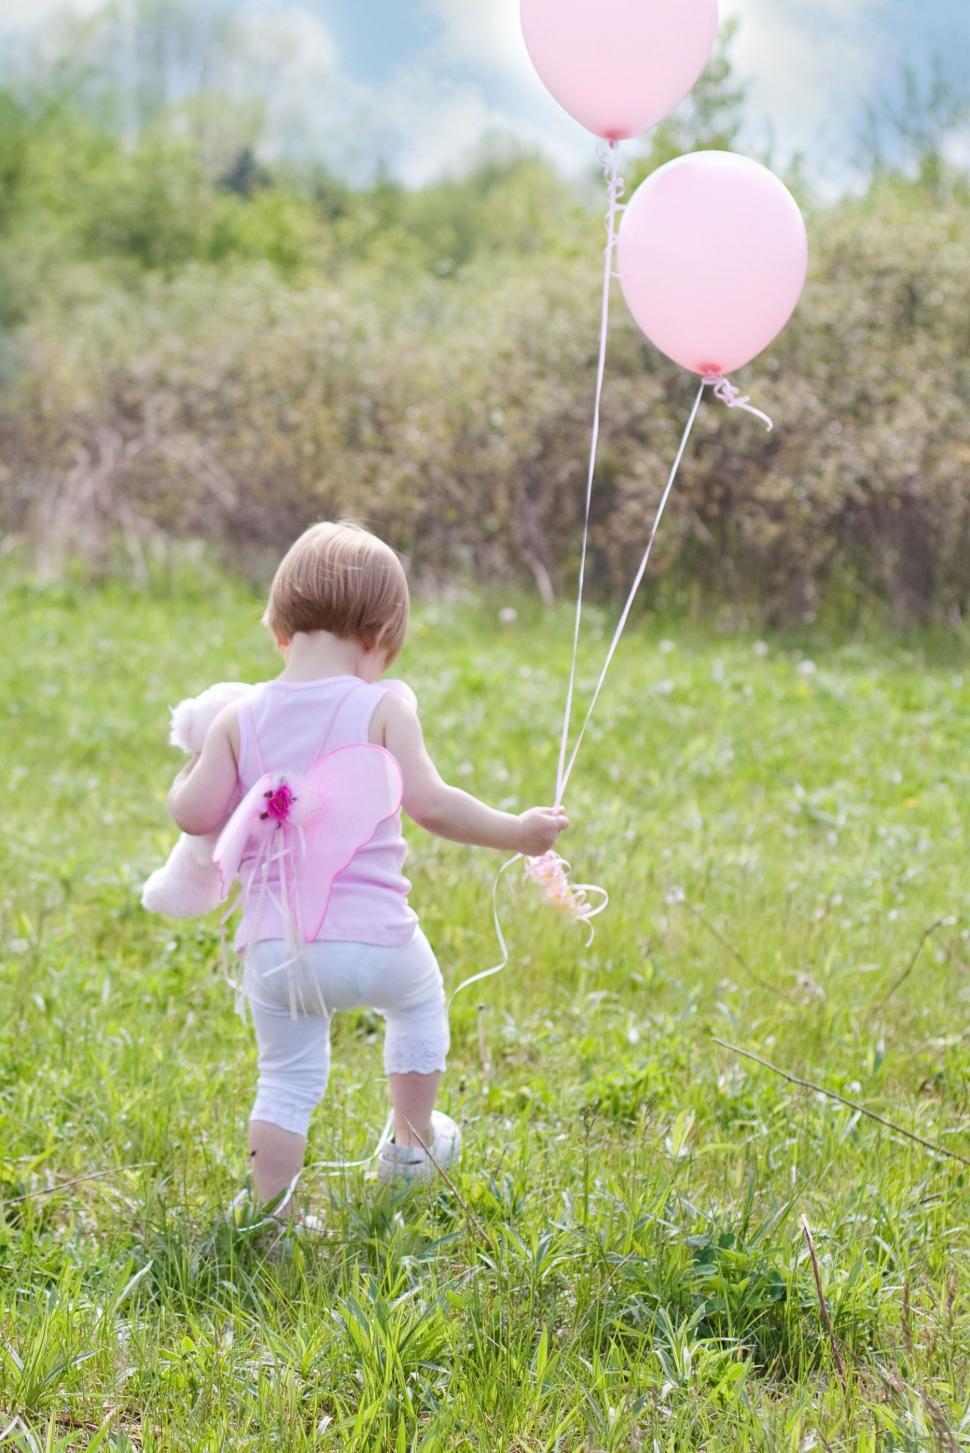 Free Image of Little Girl With Balloons  